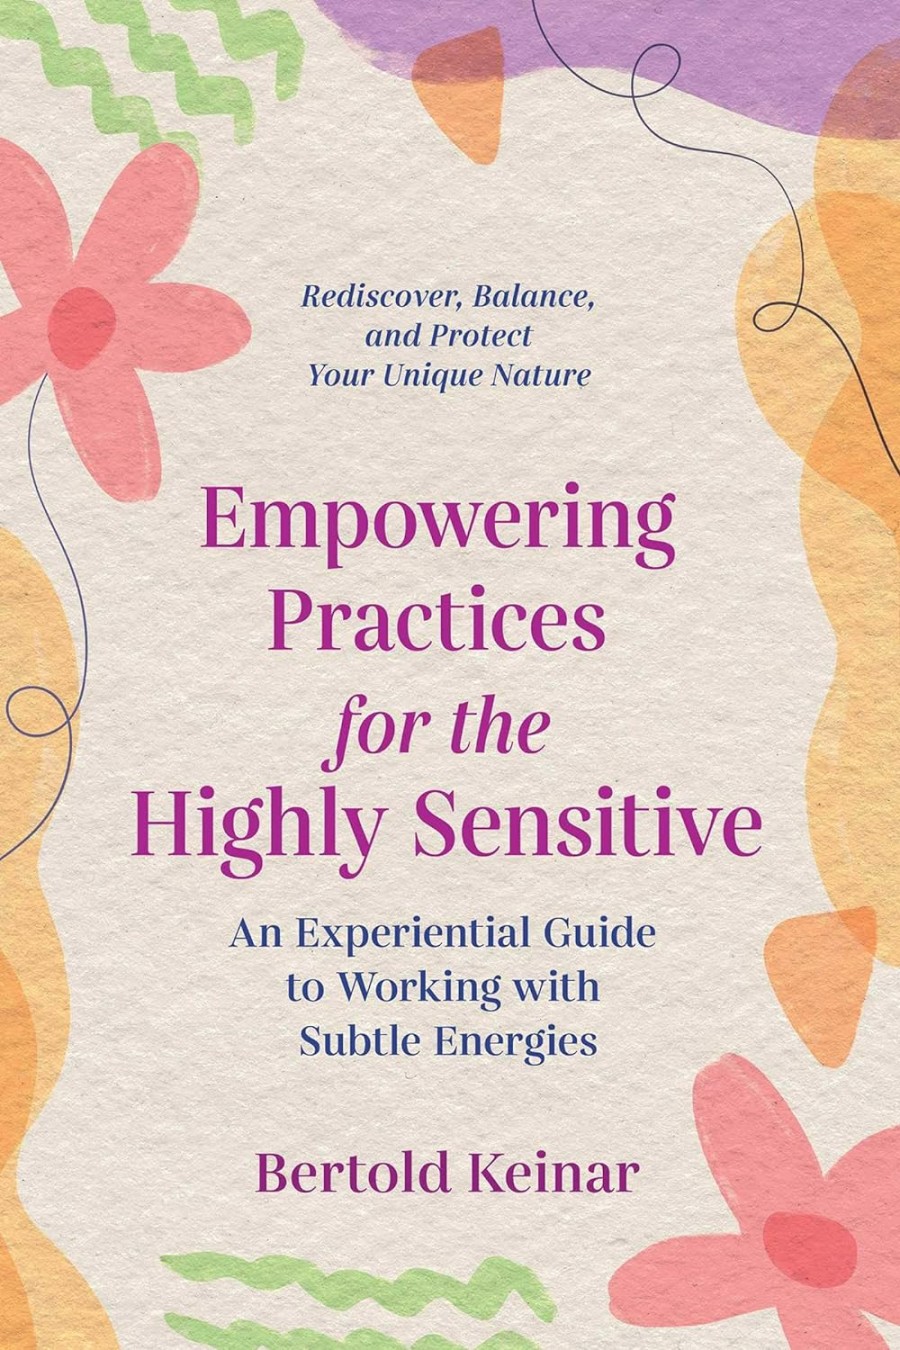 empowering practices (for highly sensitive people)